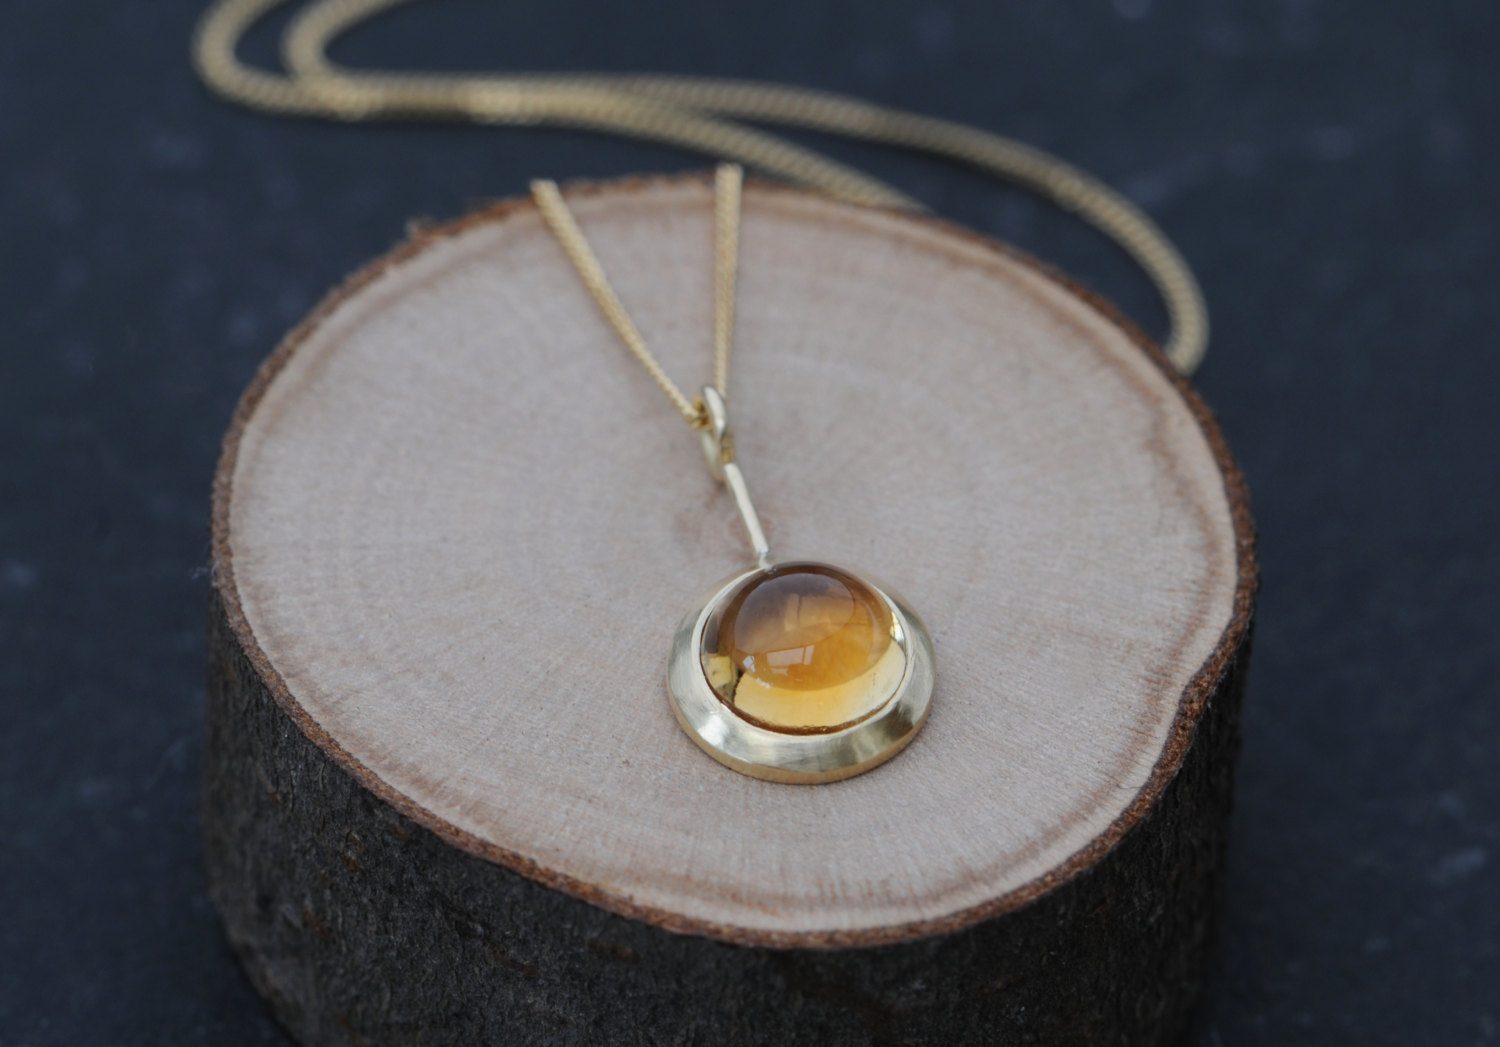 Beautiful citrine cabochon 'Lollipop' necklace, set in 18k yellow gold. Designed and handmade by William White with a choice of 18k gold chain lengths.